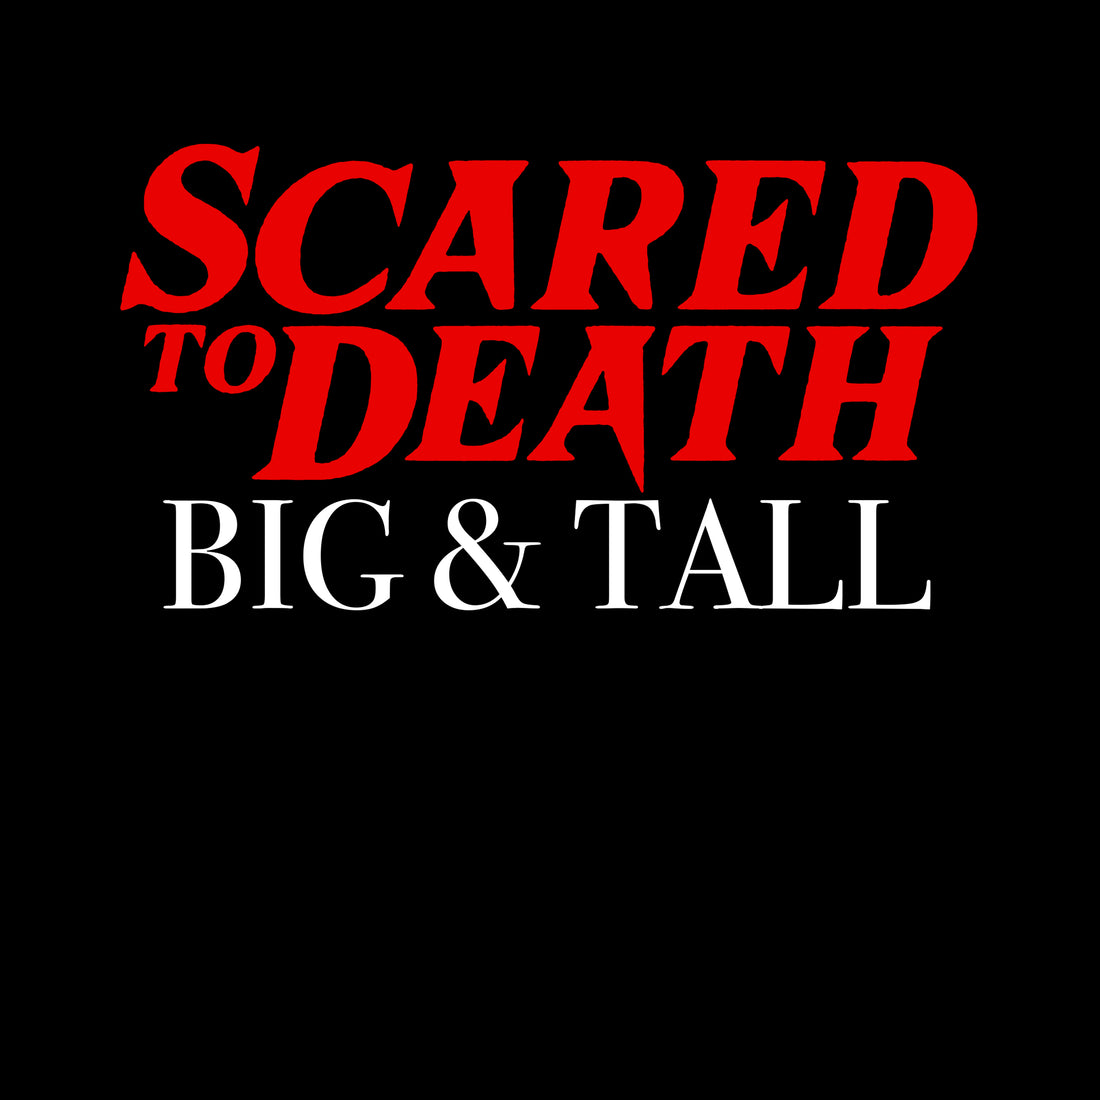 SCARED TO DEATH EXTENDED SIZING